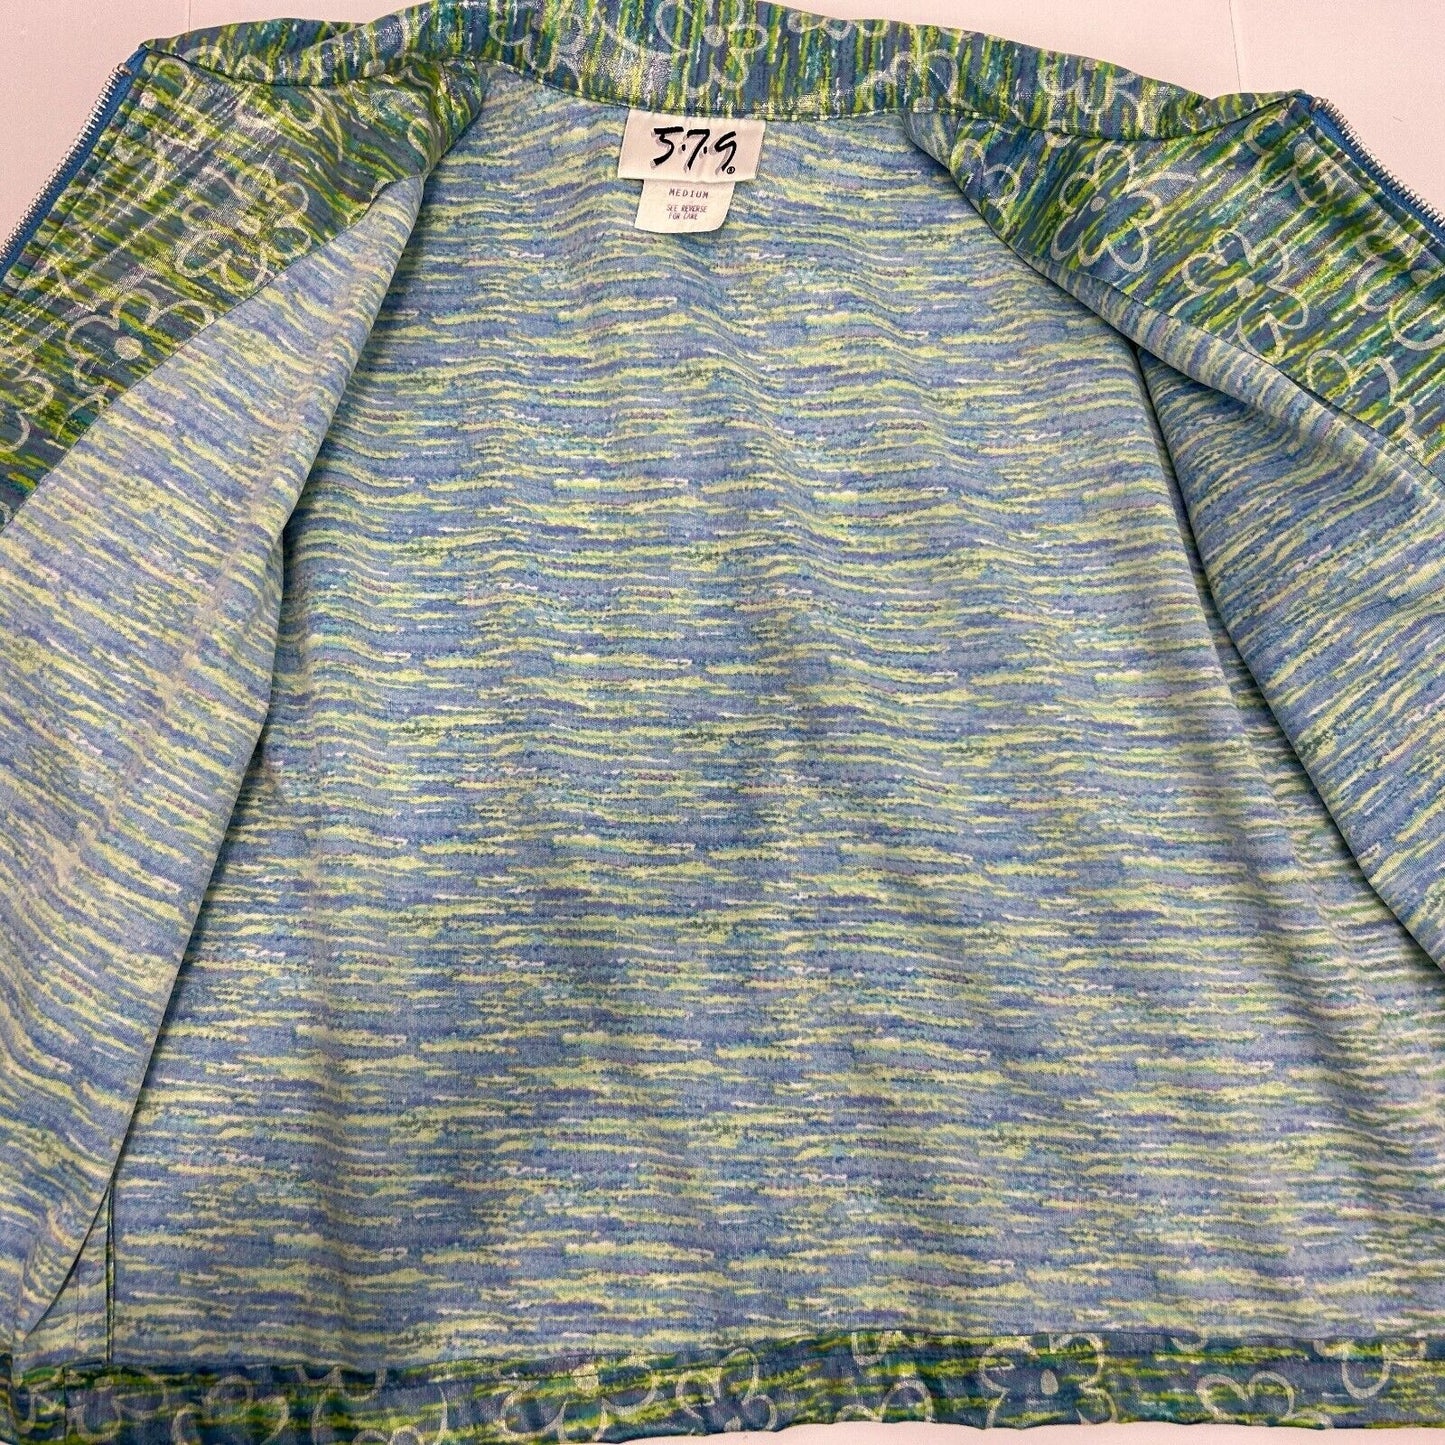 5-7-9 579 Vintage 90s Womens Cropped Rain Jacket Floral Green Made In USA Medium